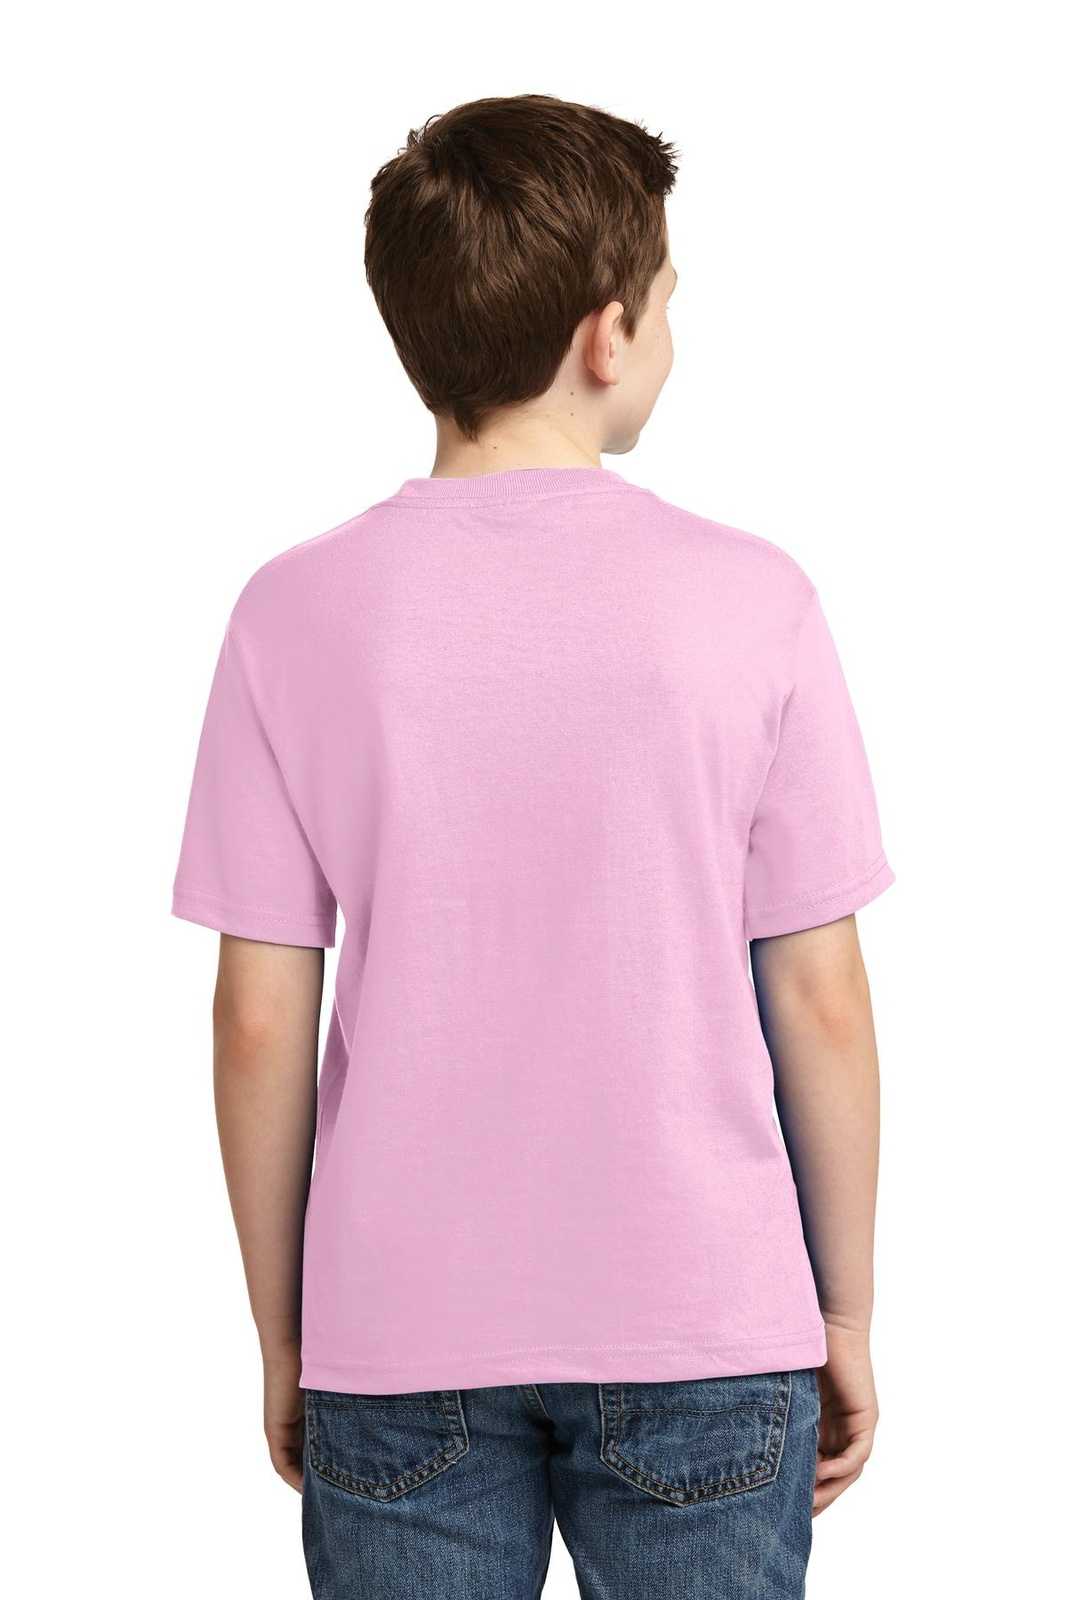 Jerzees 29B Youth Dri-Power 50/50 Cotton/Poly T-Shirt - Classic Pink - HIT a Double